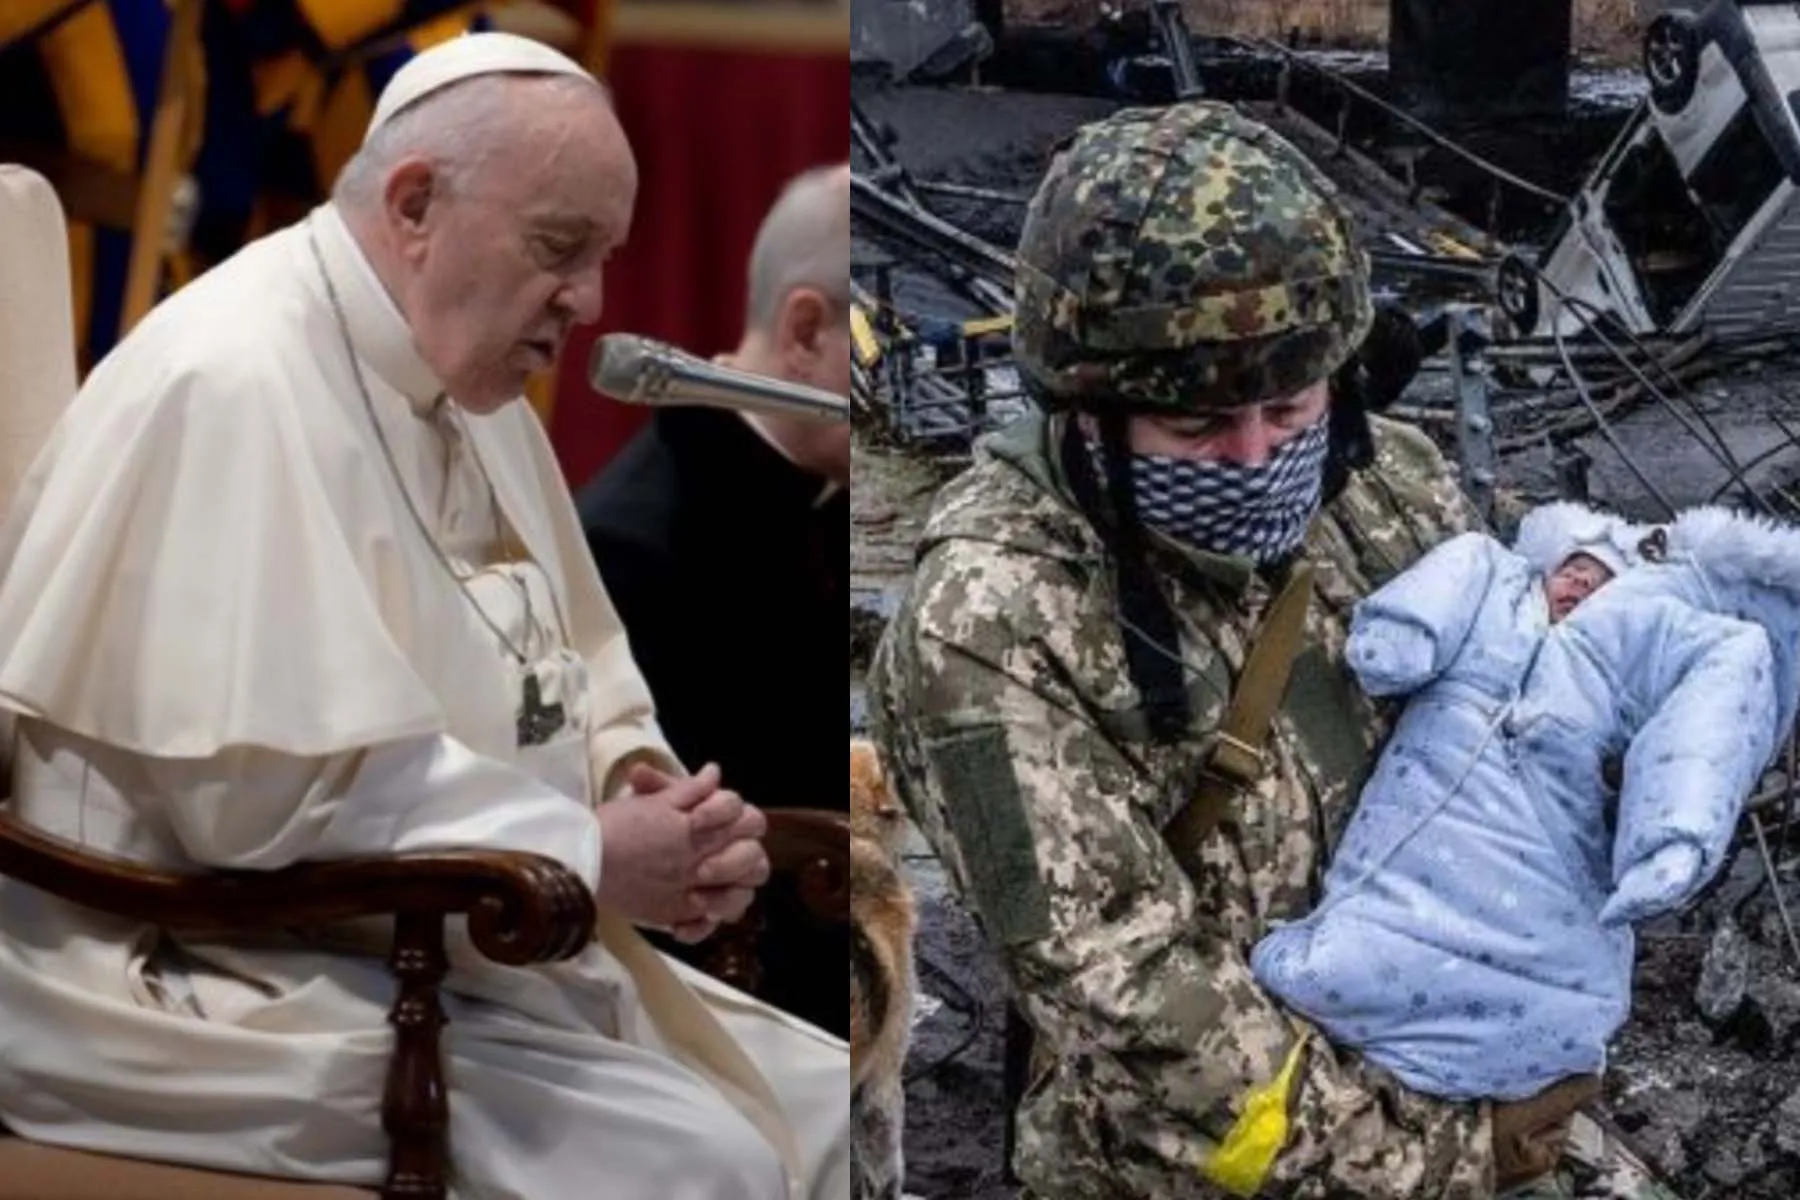 Pope Francis prays for Ukraine | A Ukrainian soldier rescues a child?w=200&h=150